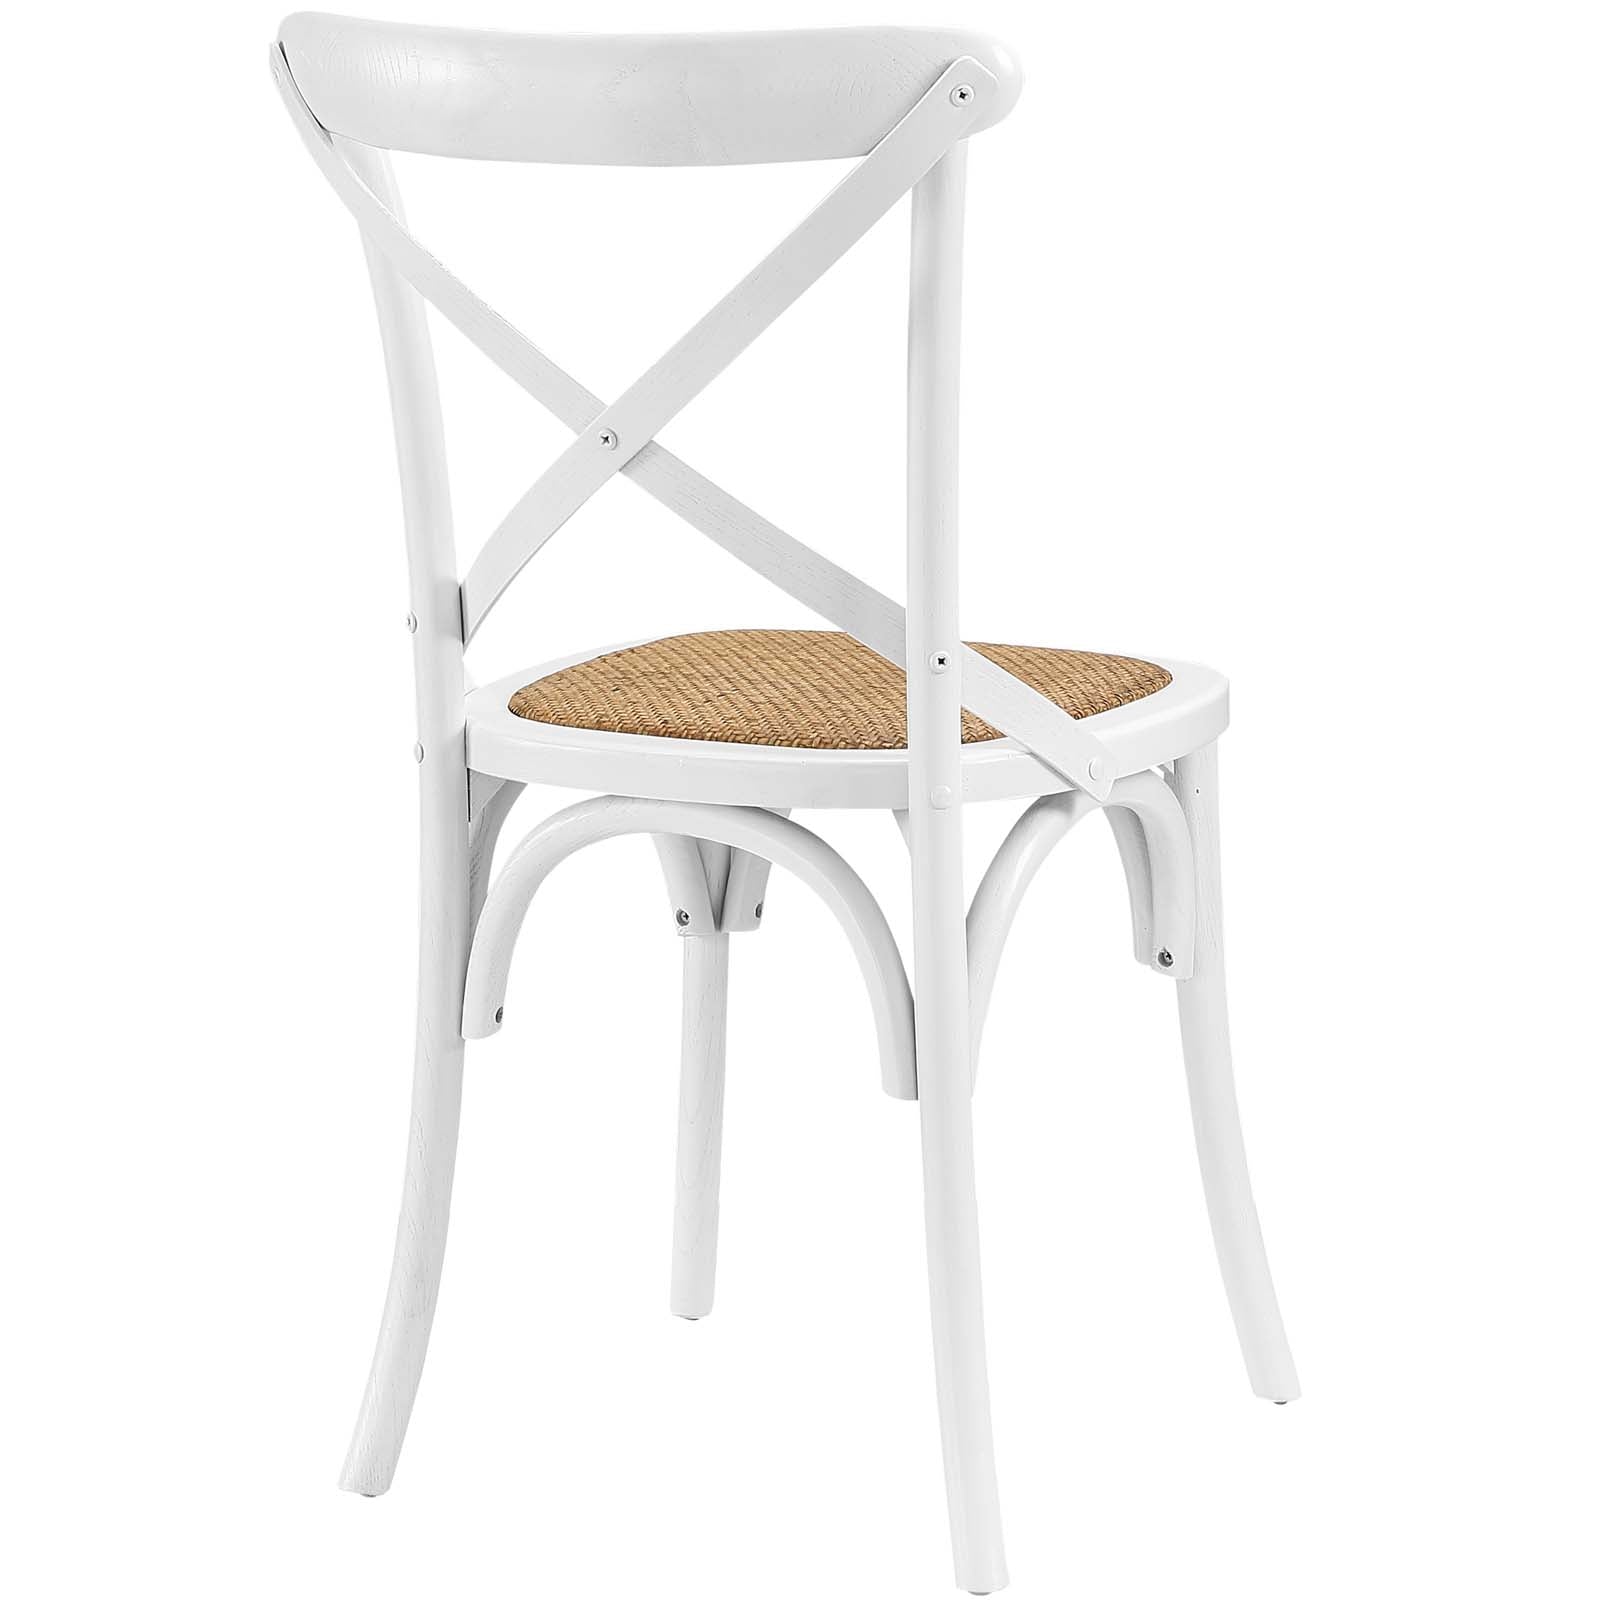 Gear Dining Side Chair Set of 2 - East Shore Modern Home Furnishings